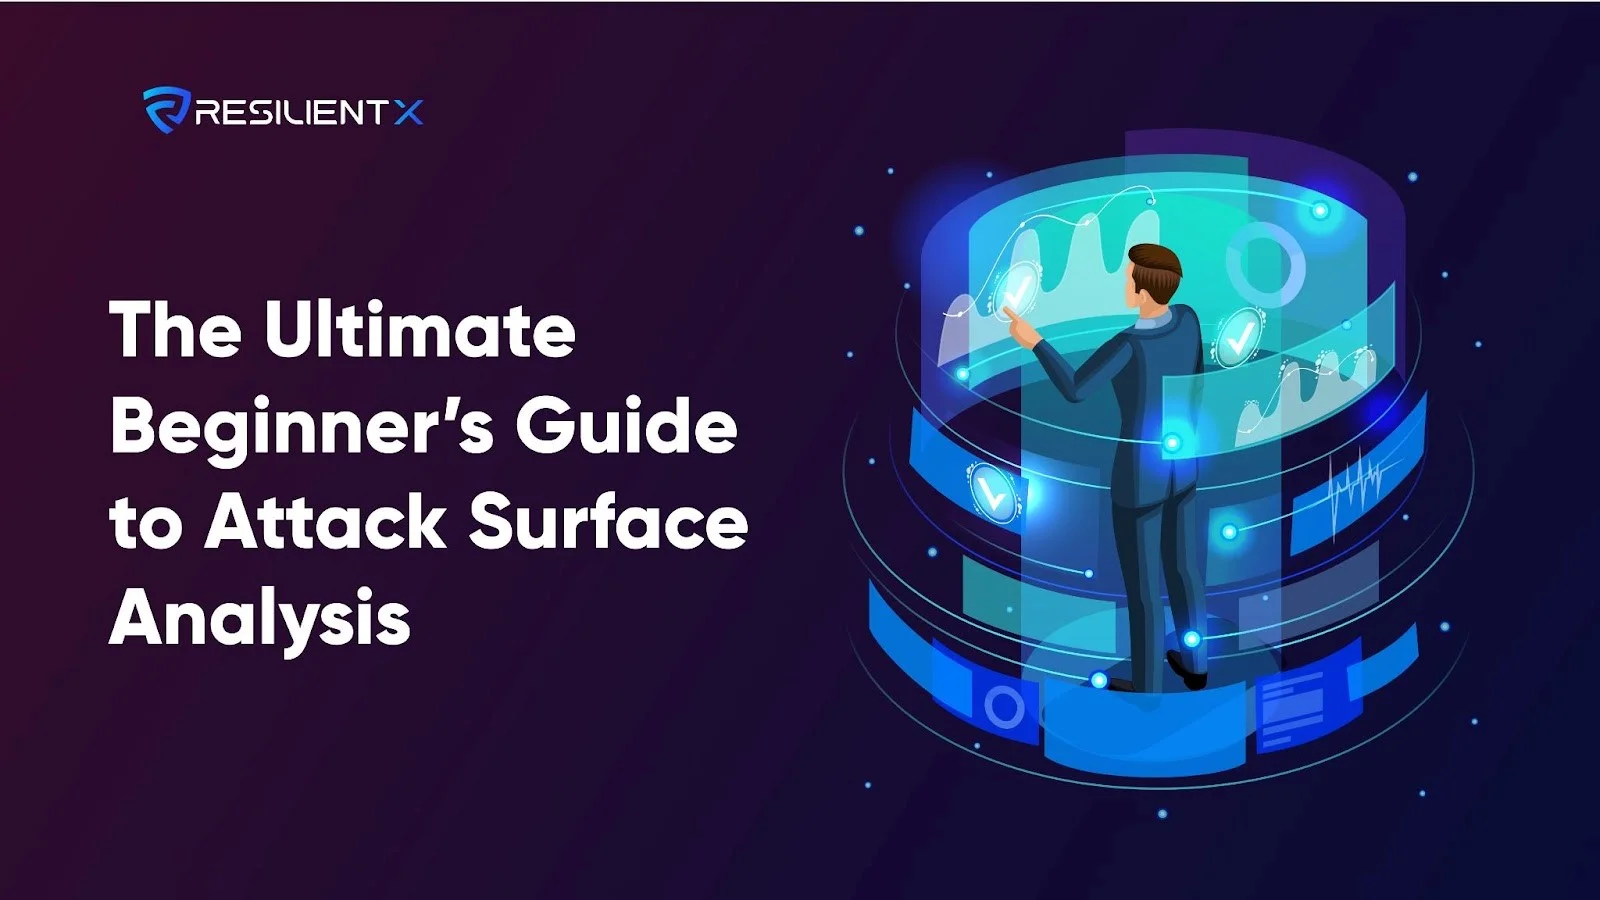 Identifying and Mitigating Risks in Your Attack Surface - A Beginner's Guide